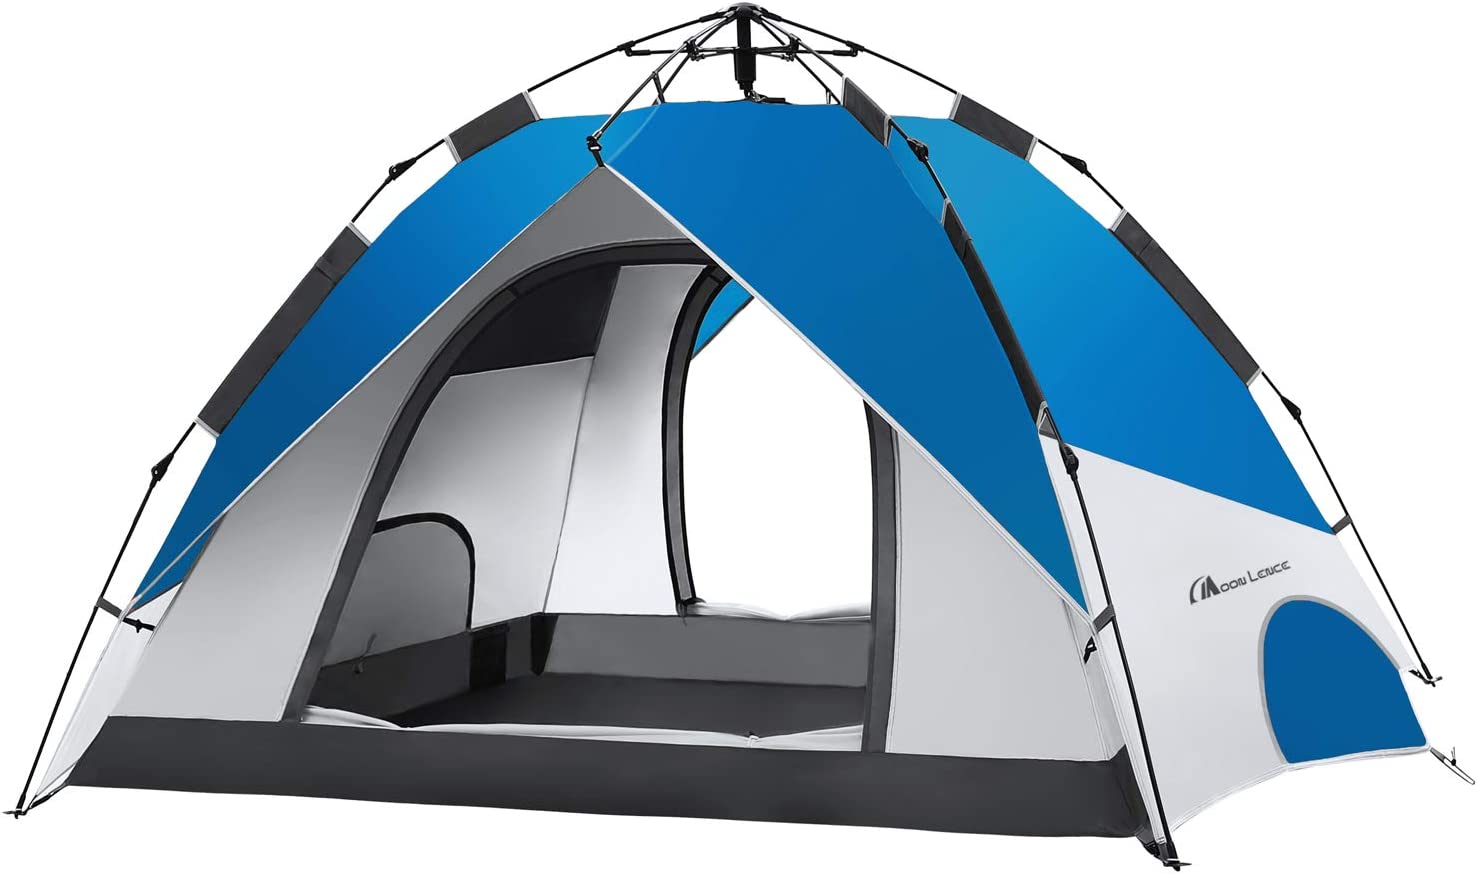  3. MOON LENCE Family Camping Tent 4 Person Tent 